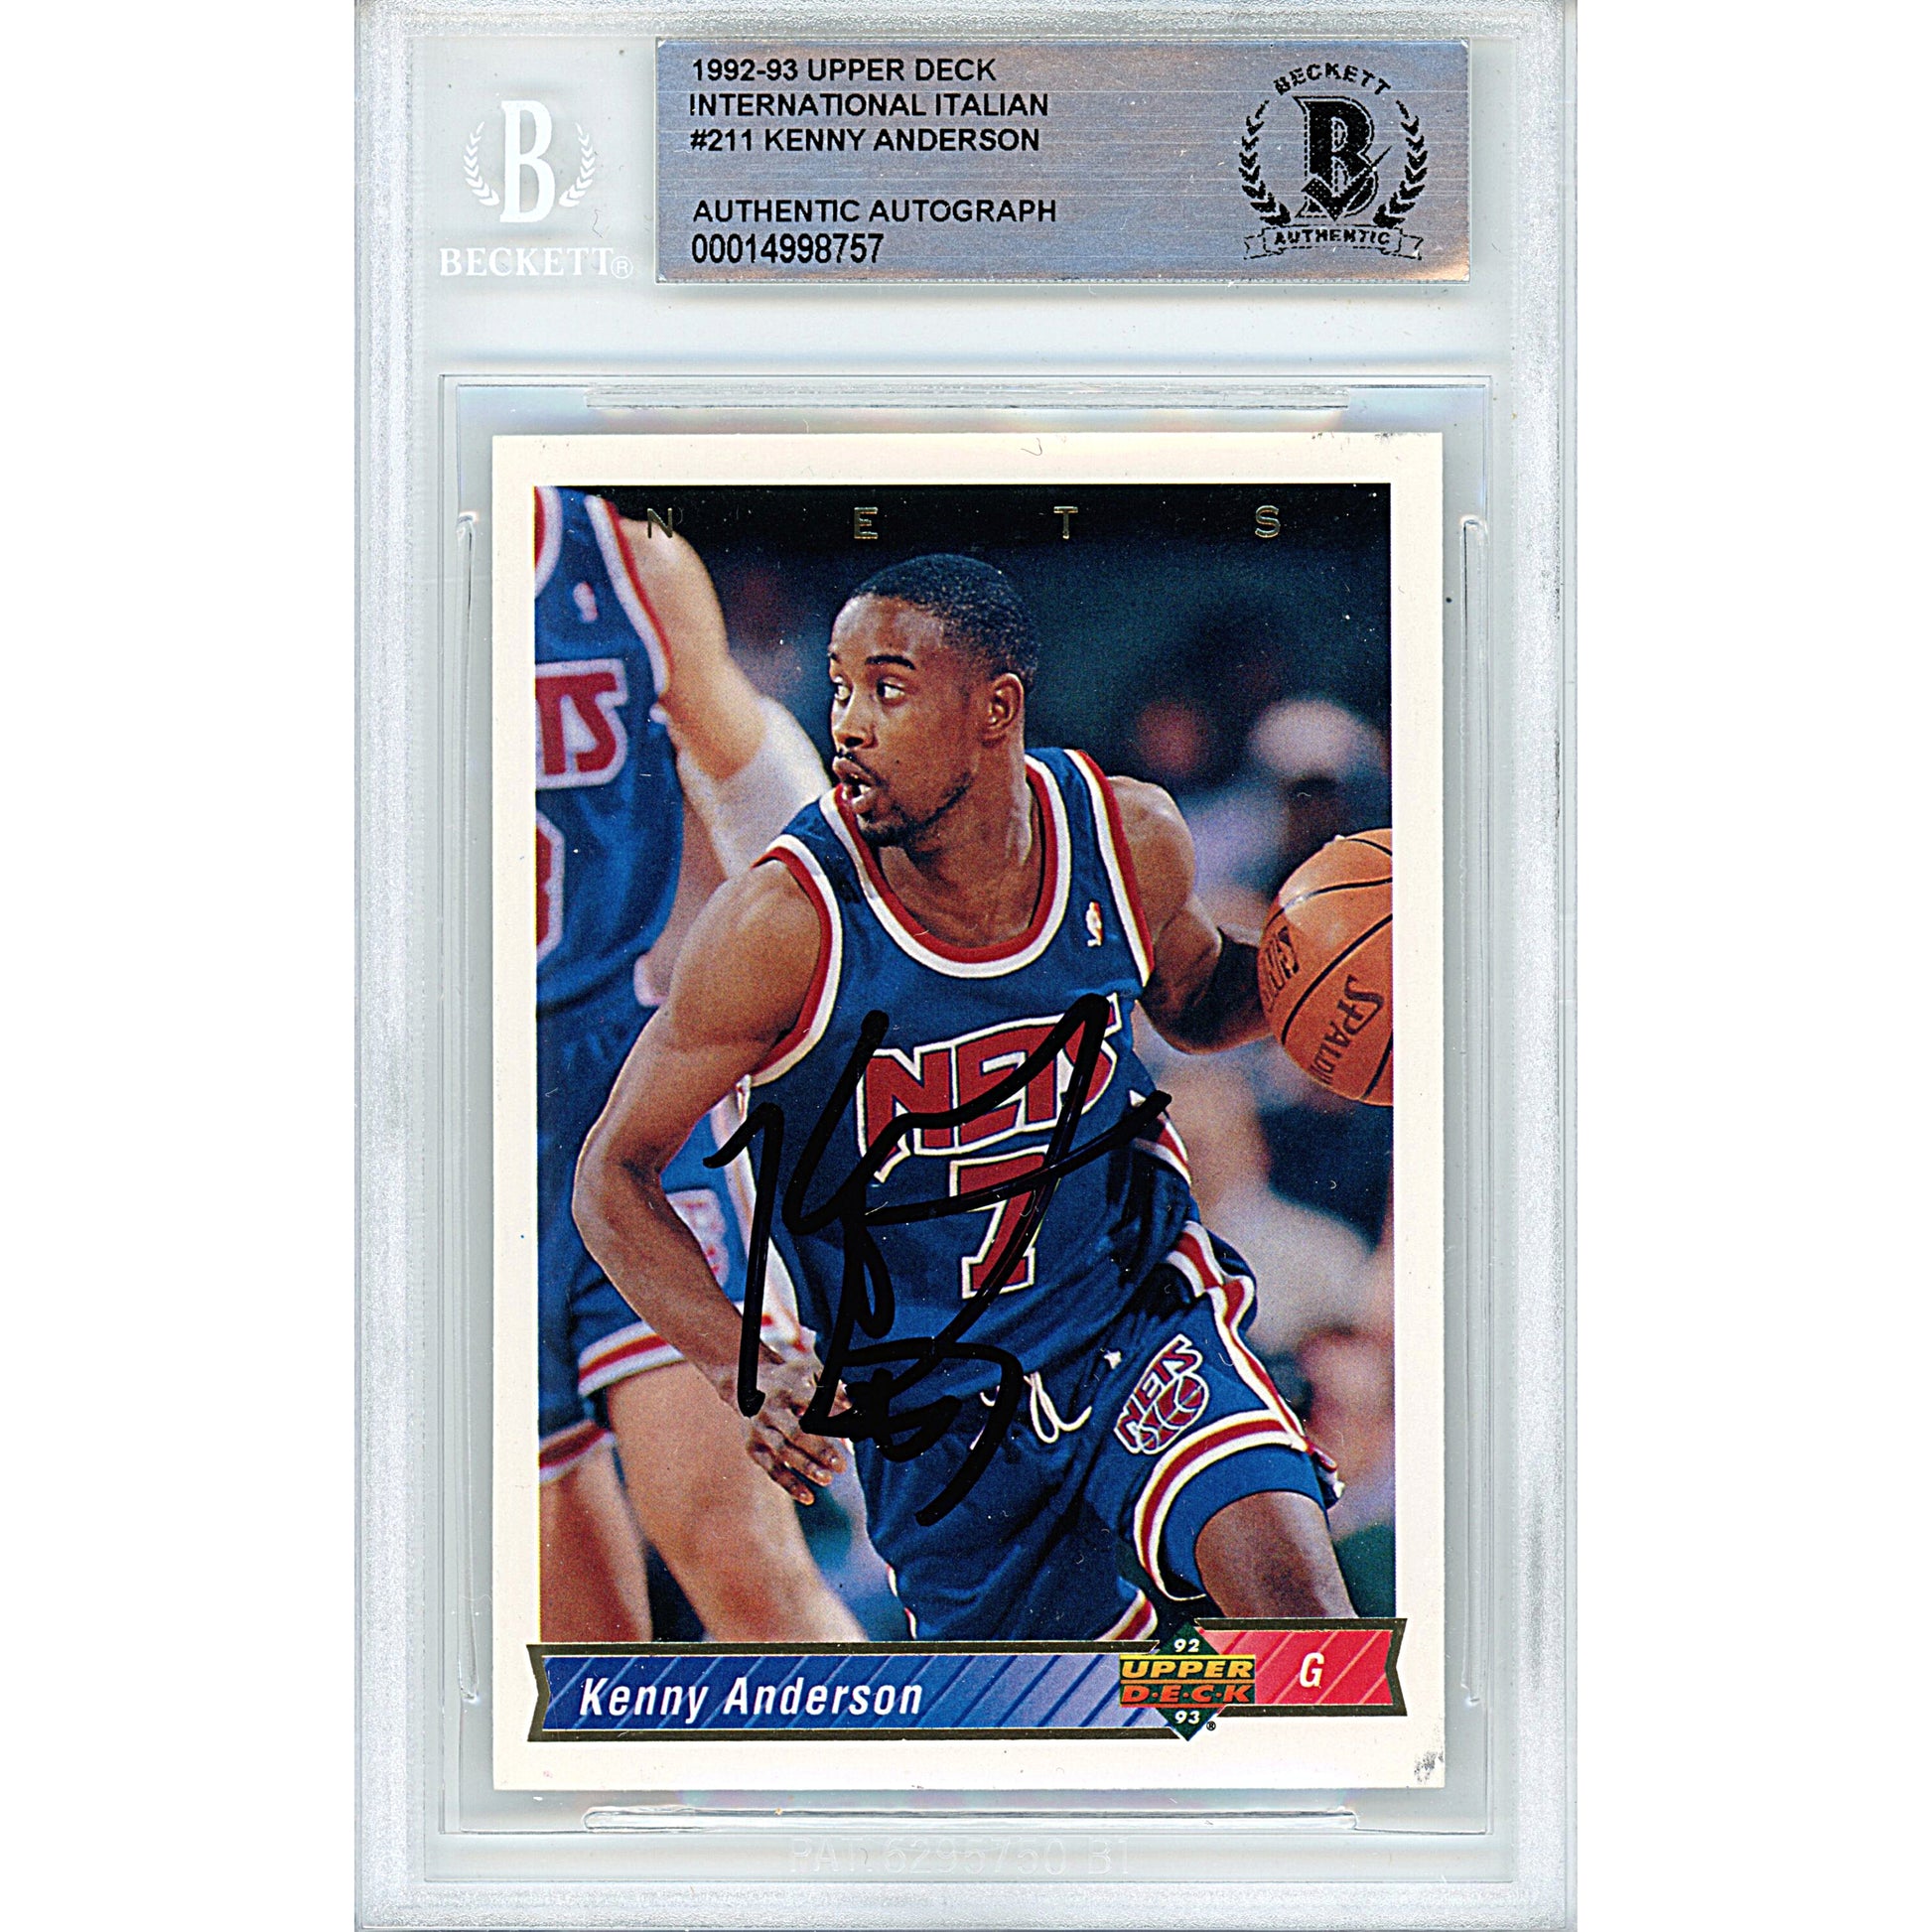 Basketballs- Autographed- Kenny Anderson Signed New Jersey Nets 1992-1993 Upper Deck International Italian Edition Basketball Card Beckett Authentication Slabbed 00014998757 - 101